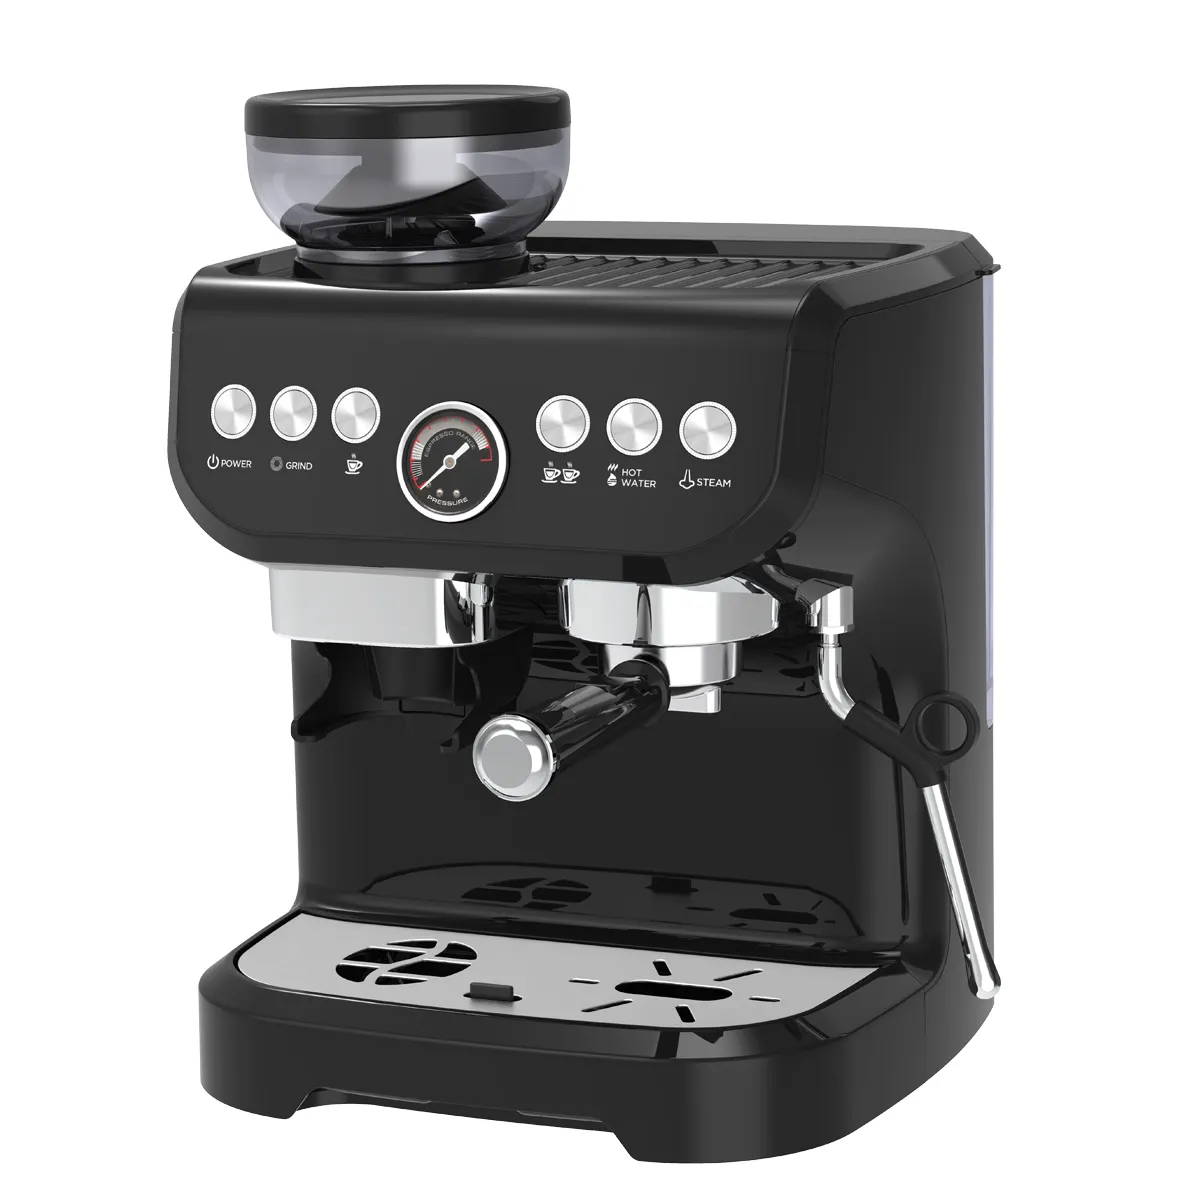 espresso and grinding integrated semi-automatic commercial coffee machine 15Bar pump pressure coffee maker